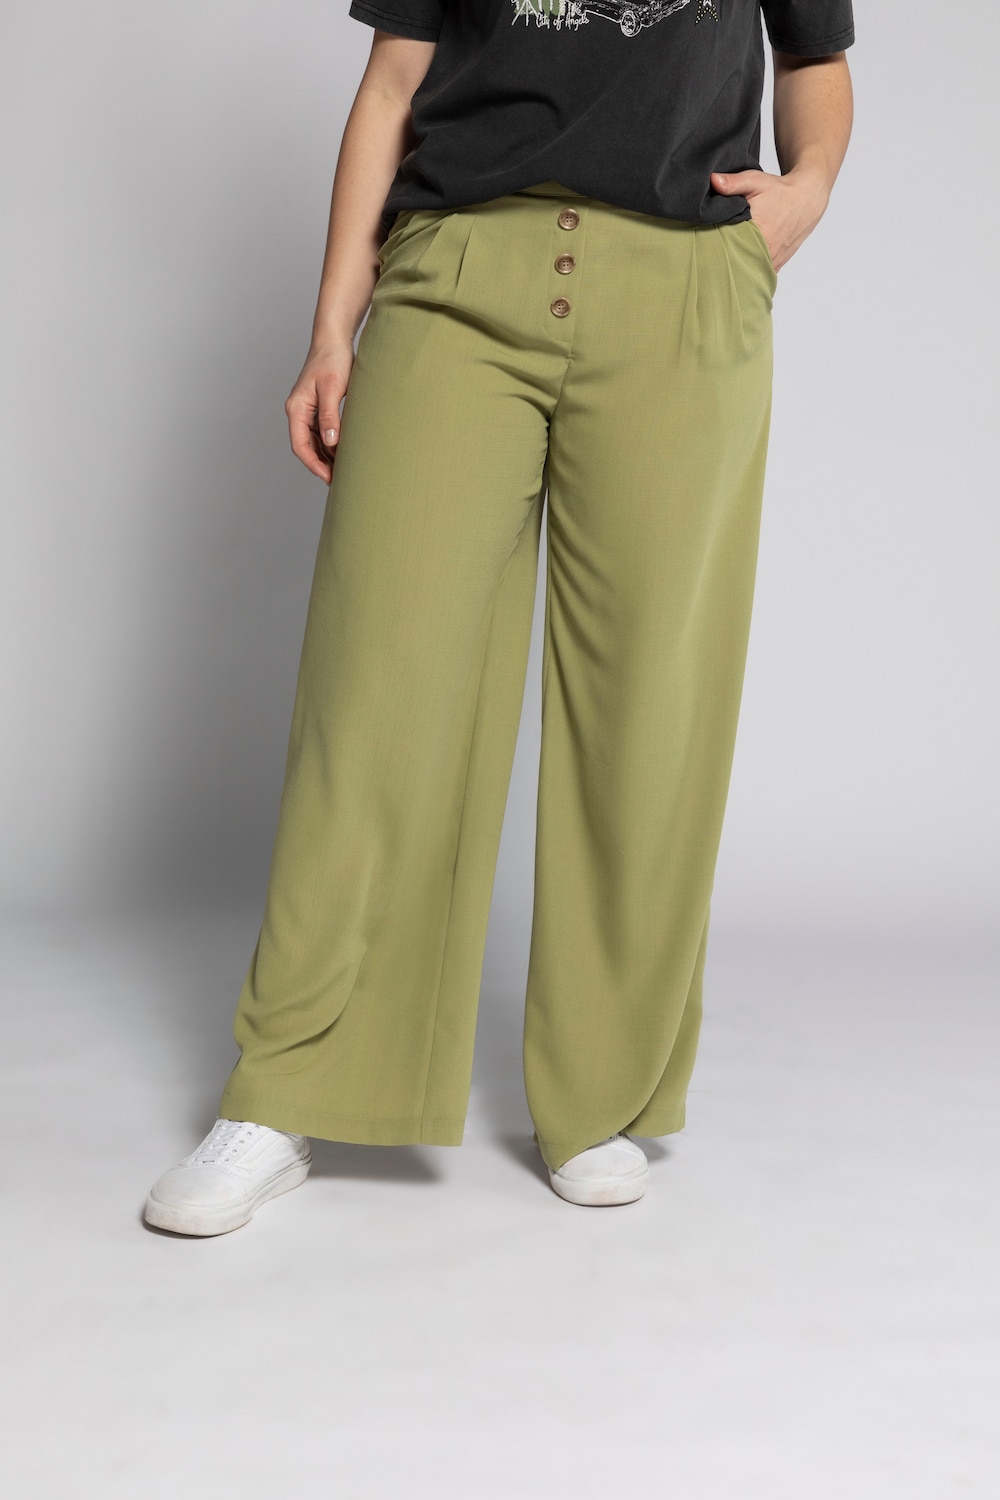 Plus Size Solid Color Super Comfy Fit Palazzo Pants, Woman, green, size: 16, polyester, Studio Untold